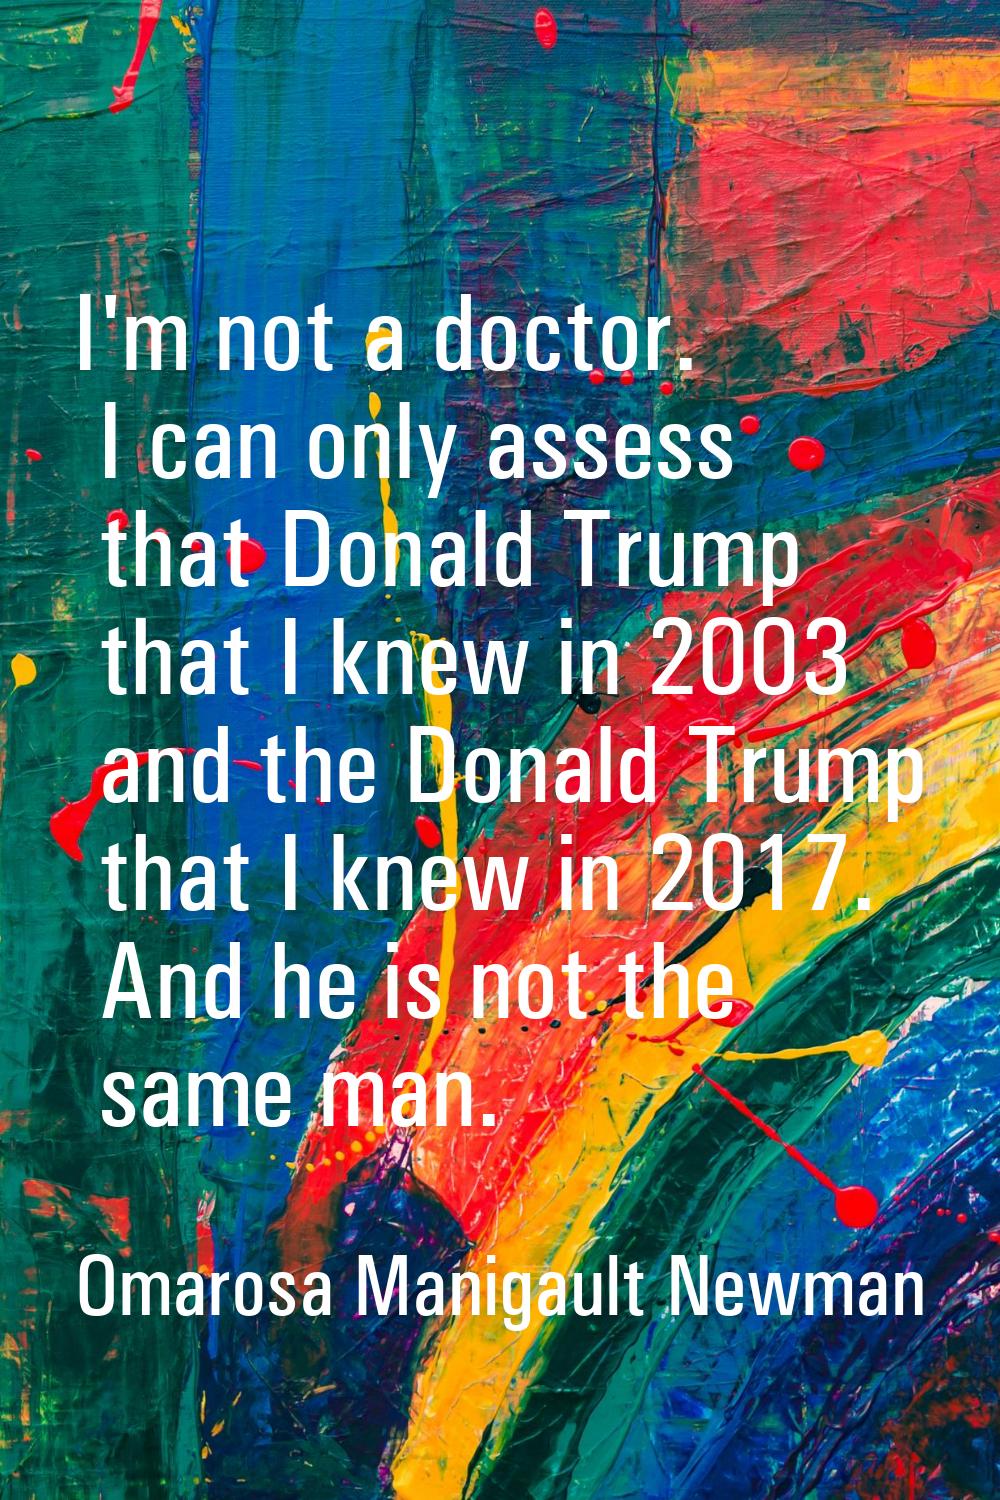 I'm not a doctor. I can only assess that Donald Trump that I knew in 2003 and the Donald Trump that